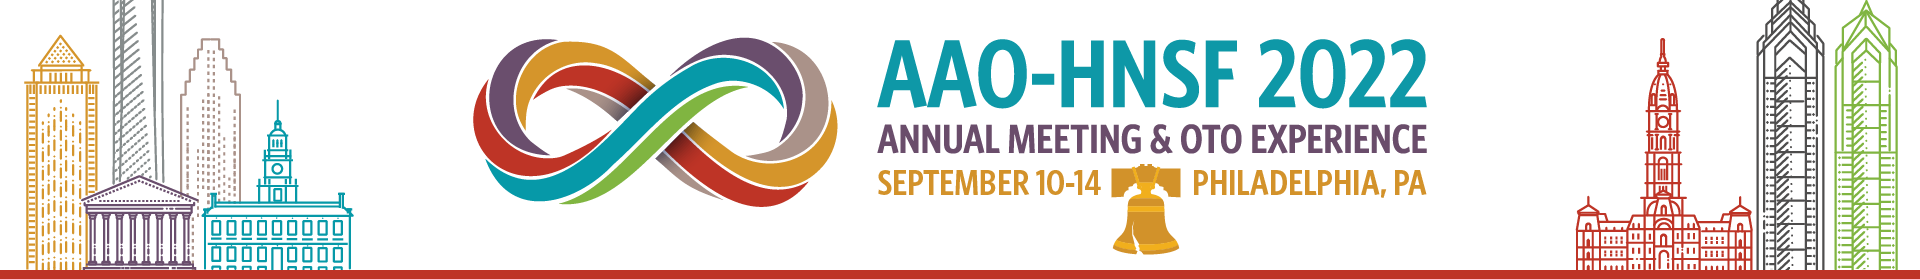 2022 AAO-HNSF Annual Meeting & OTO Experience Event Banner